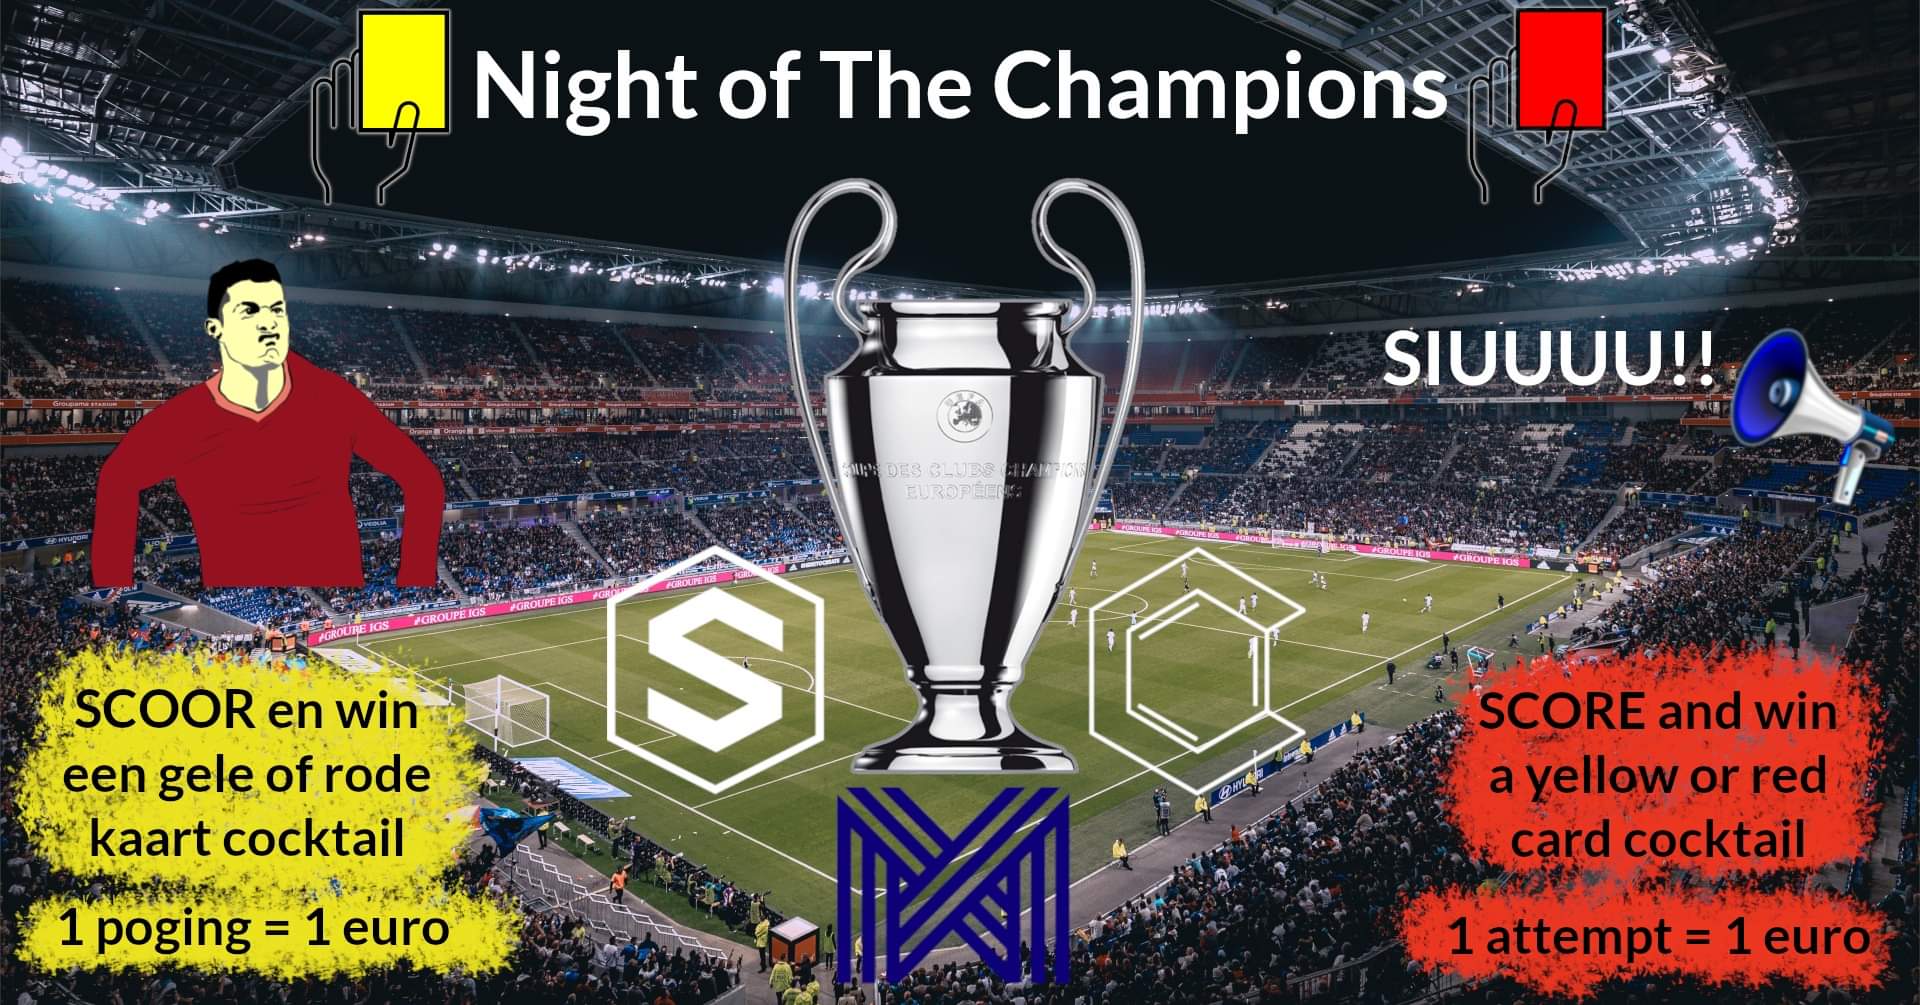 Night of The Champions Party Image